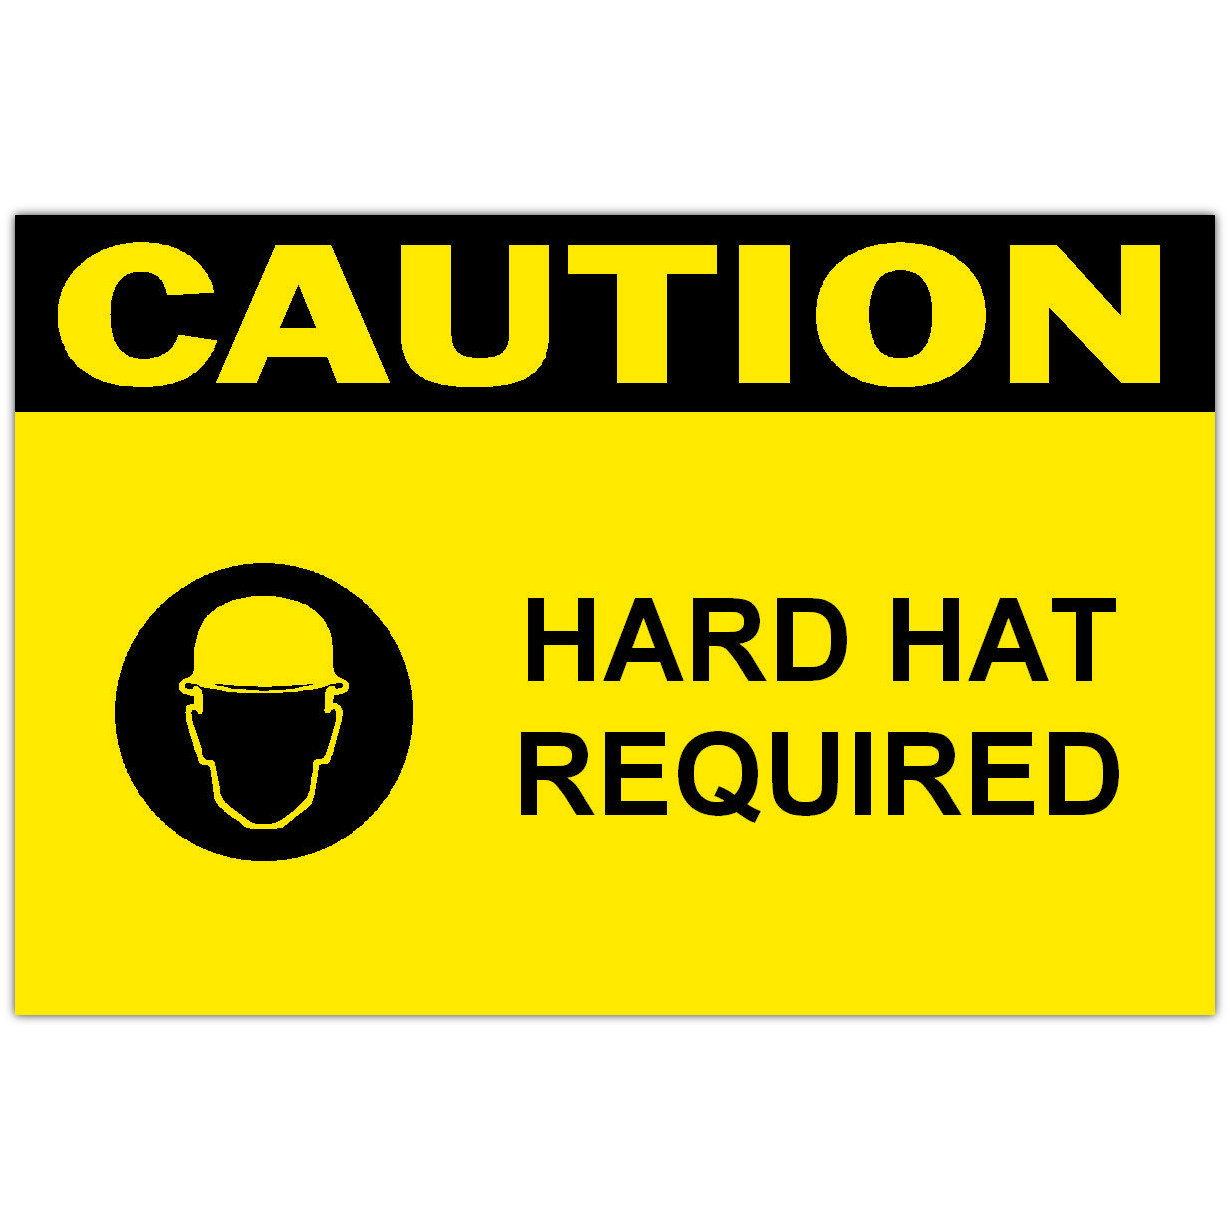 Detail view for 4" x 6" CAUTION Hard Hat Required Safety Label